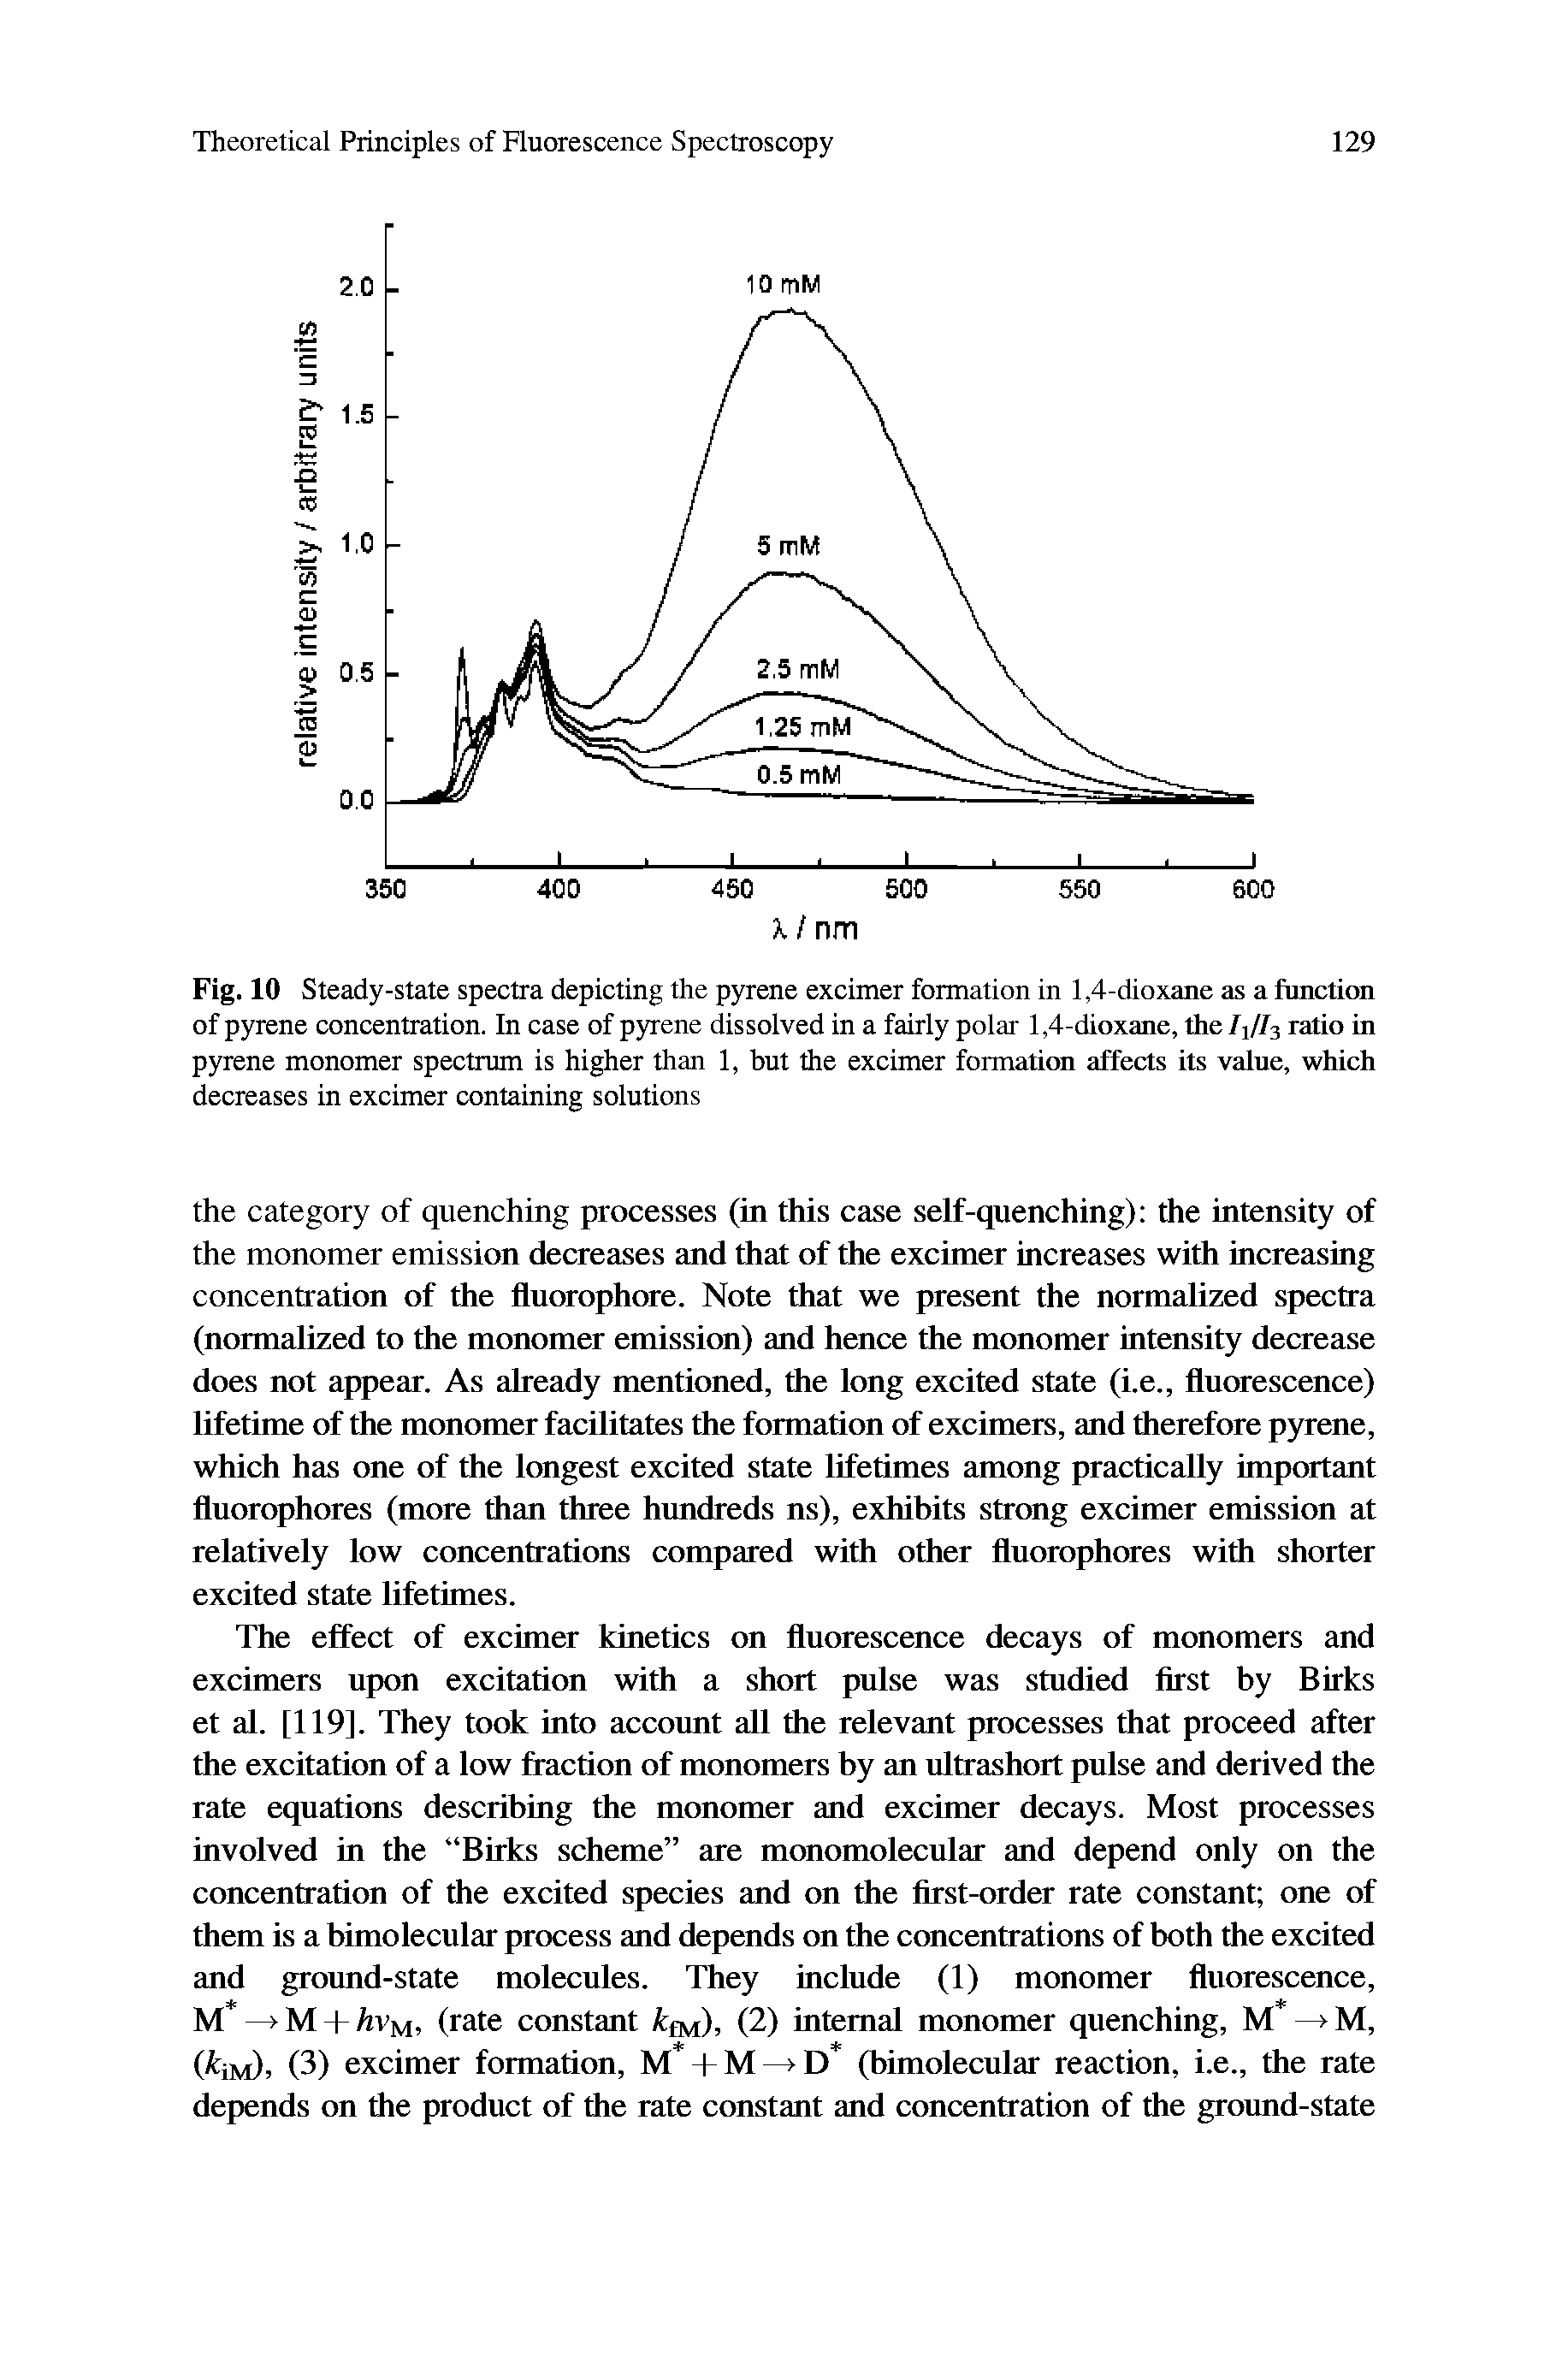 Fig. 10 Steady-slate spectra depicting the pyrene excimer formation in 1,4-dioxane as a fimctitm of pyrene concentration. In case of pyrene dissolved in a fairly polar 1,4-dioxane, the/i//3 ratio in pyrene monomer spectrum is higher than 1, but the excimer formation affects its value, which decreases in excimer containing solutions...